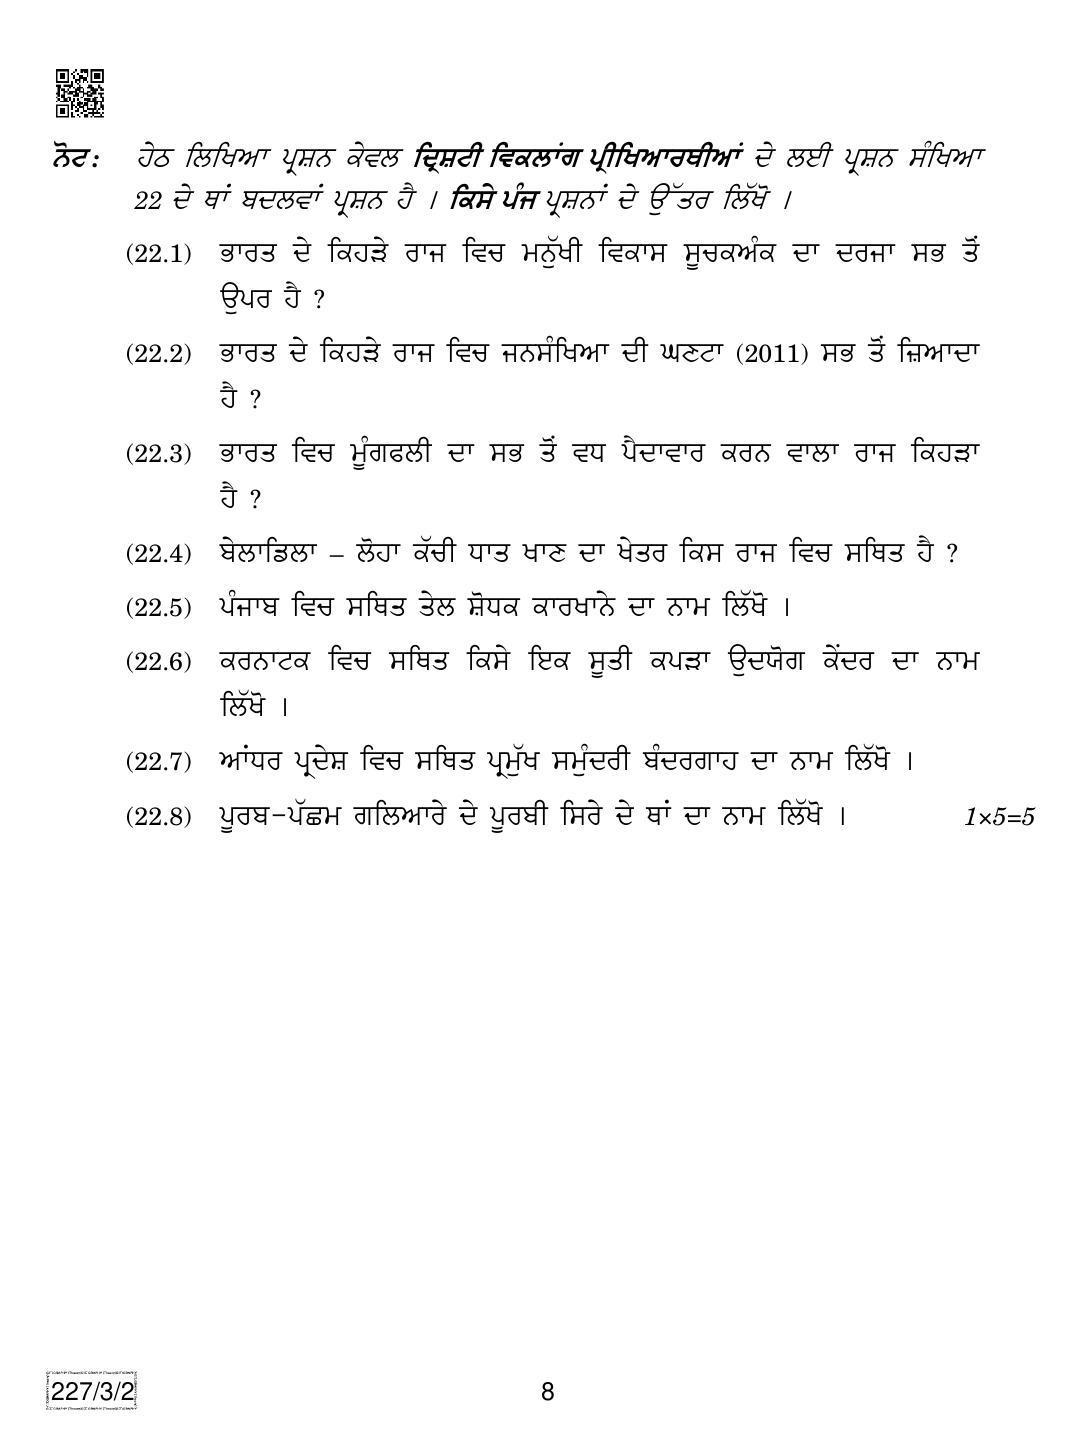 CBSE Class 12 227-3-2 Geography (Punjabi) 2019 Question Paper - Page 8